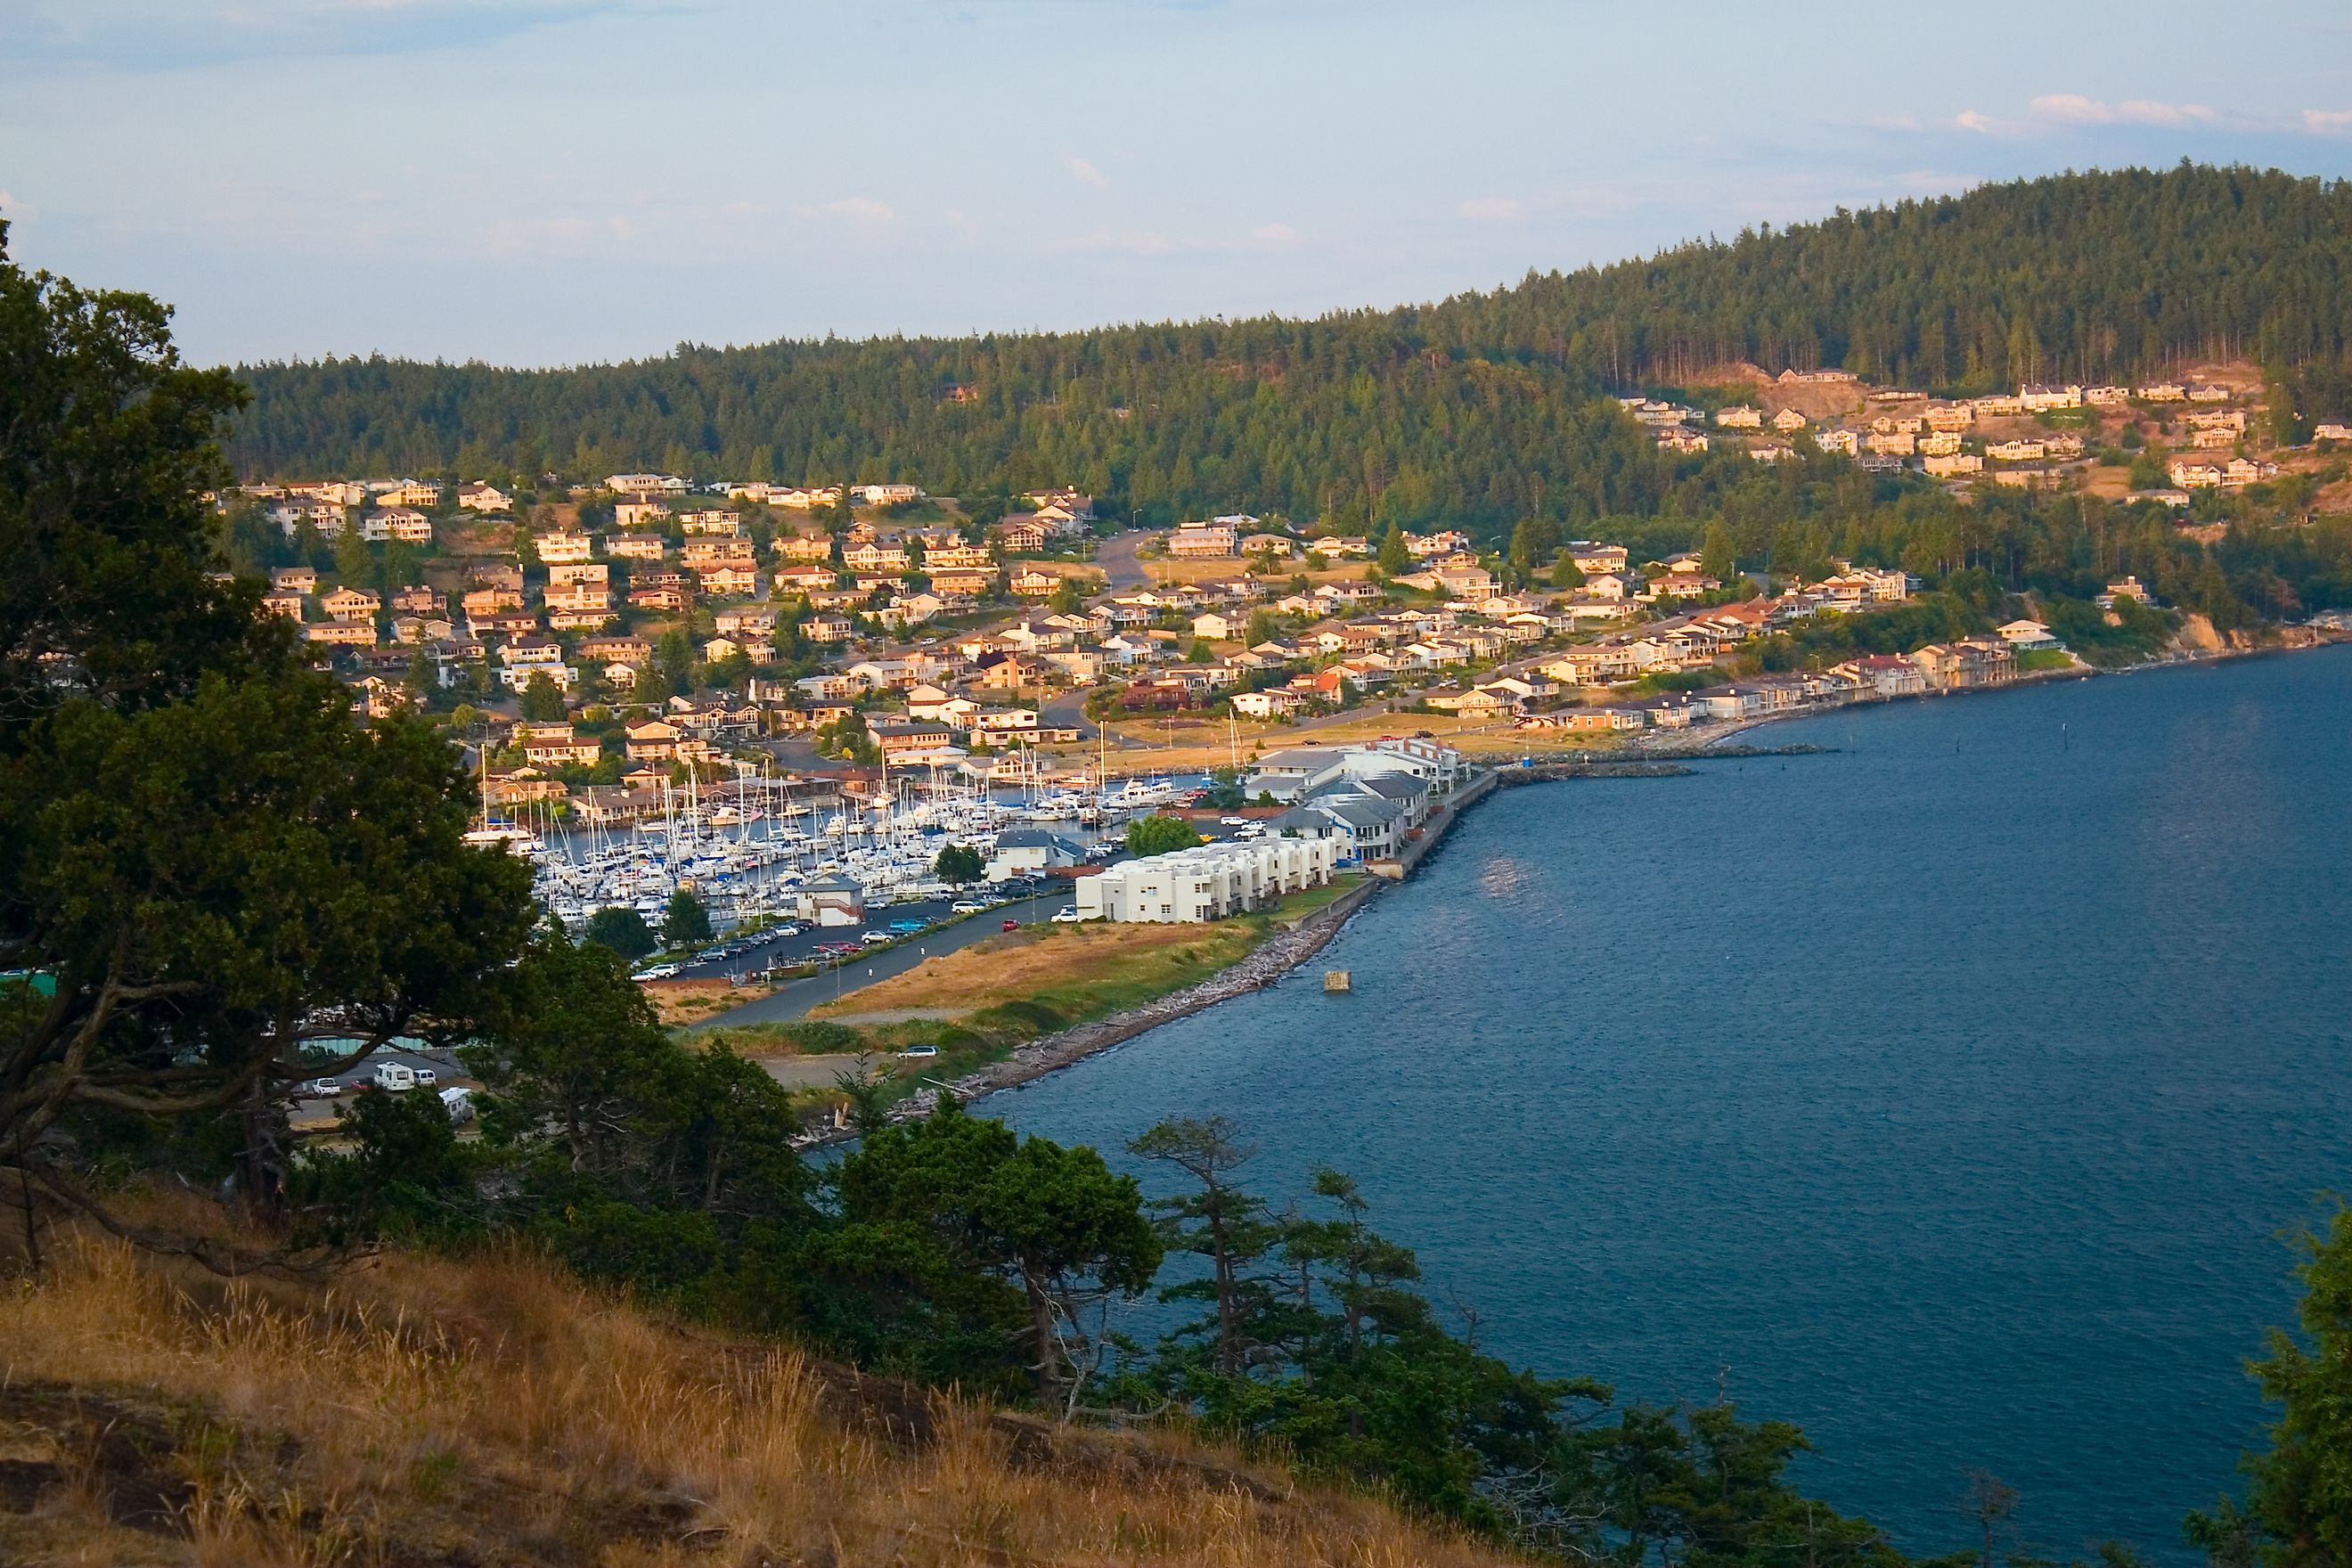 A view of Anacortes, the only city on Fidalgo Island.